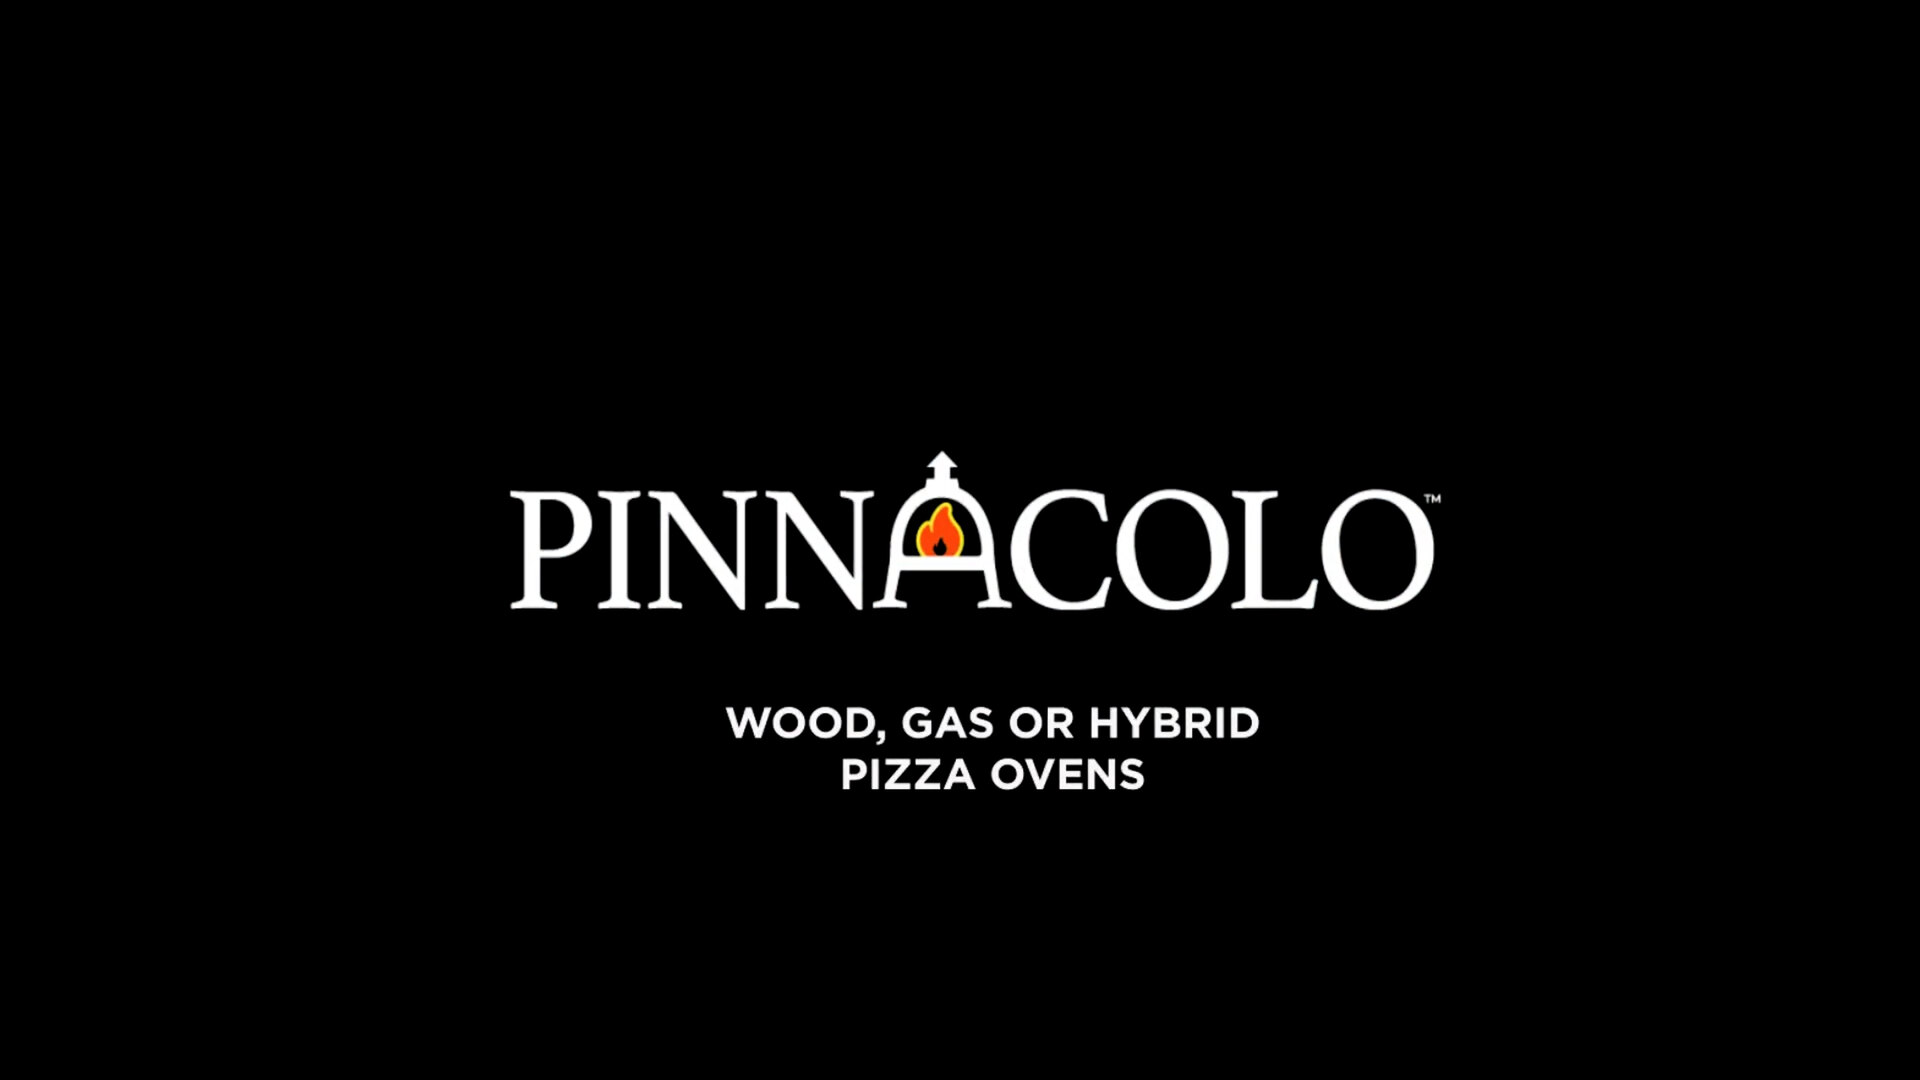 PINNACOLO Ibrido HYBRID Wood Gas Pizza Oven with Accessories